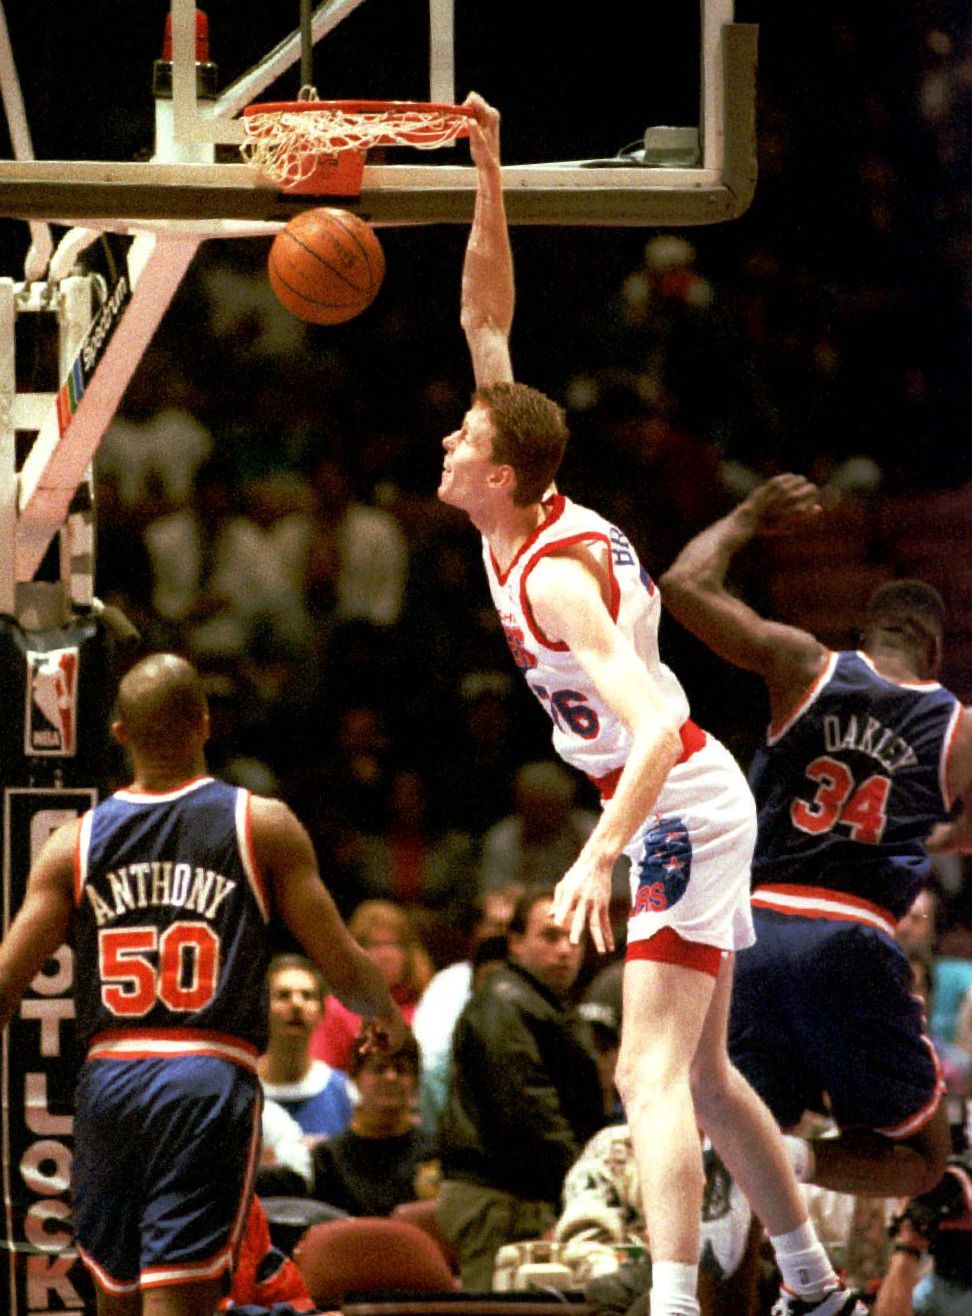 After accident that paralyzed Shawn Bradley, the former BYU player talks  about his new life